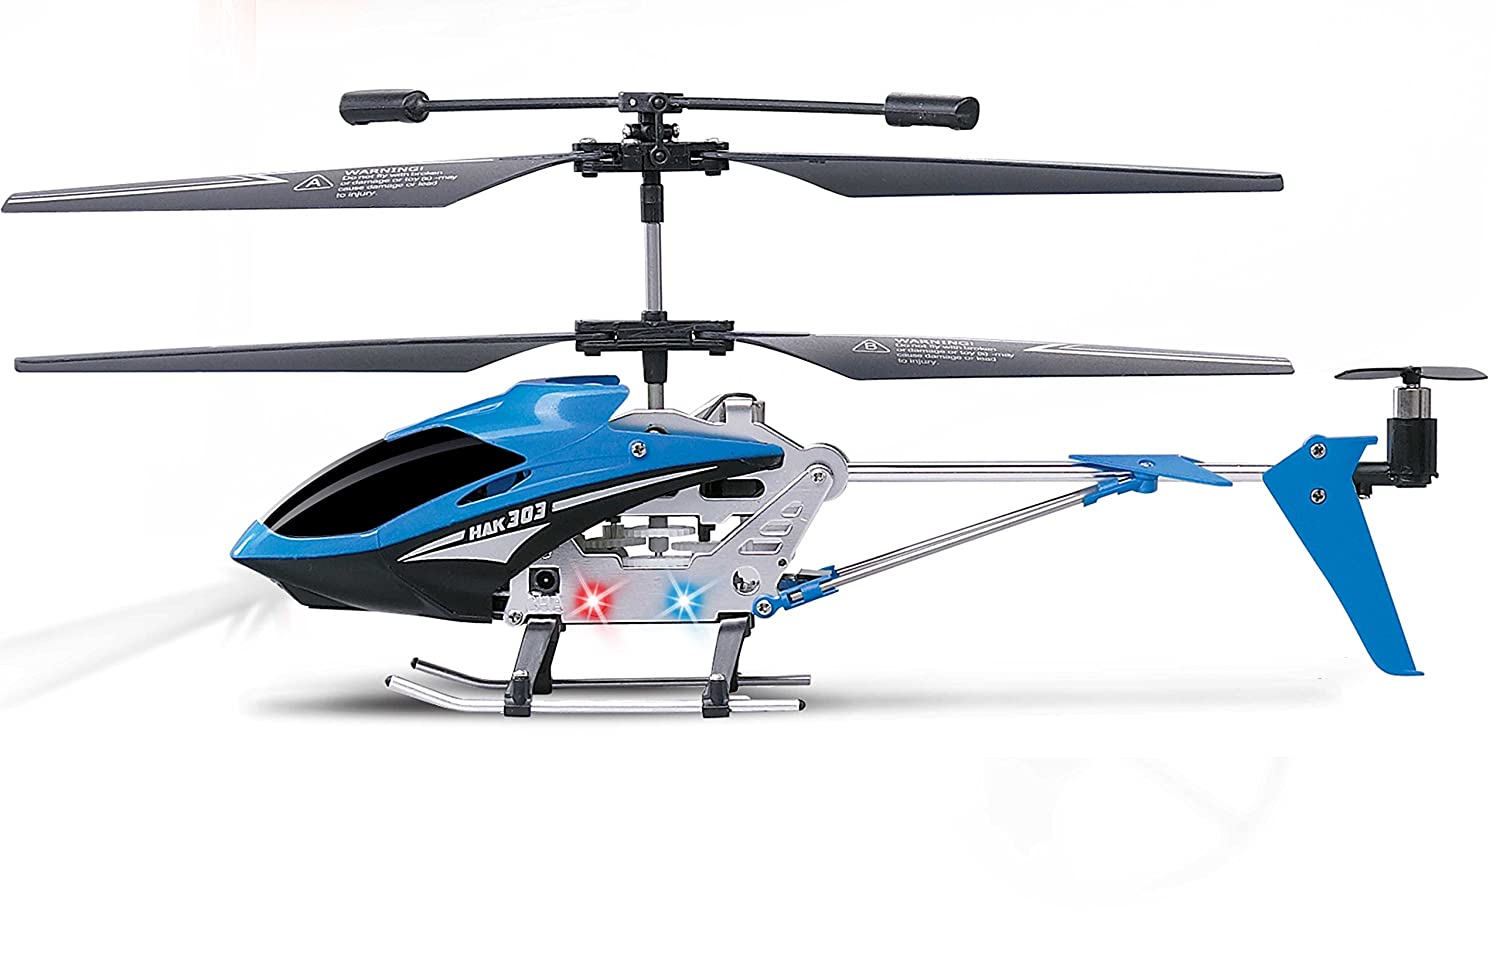 Haktoys HAK303 Infrared Control 3.5 Channel 9'' RC Helicopter with Gyroscope Stabilization & LED Lights